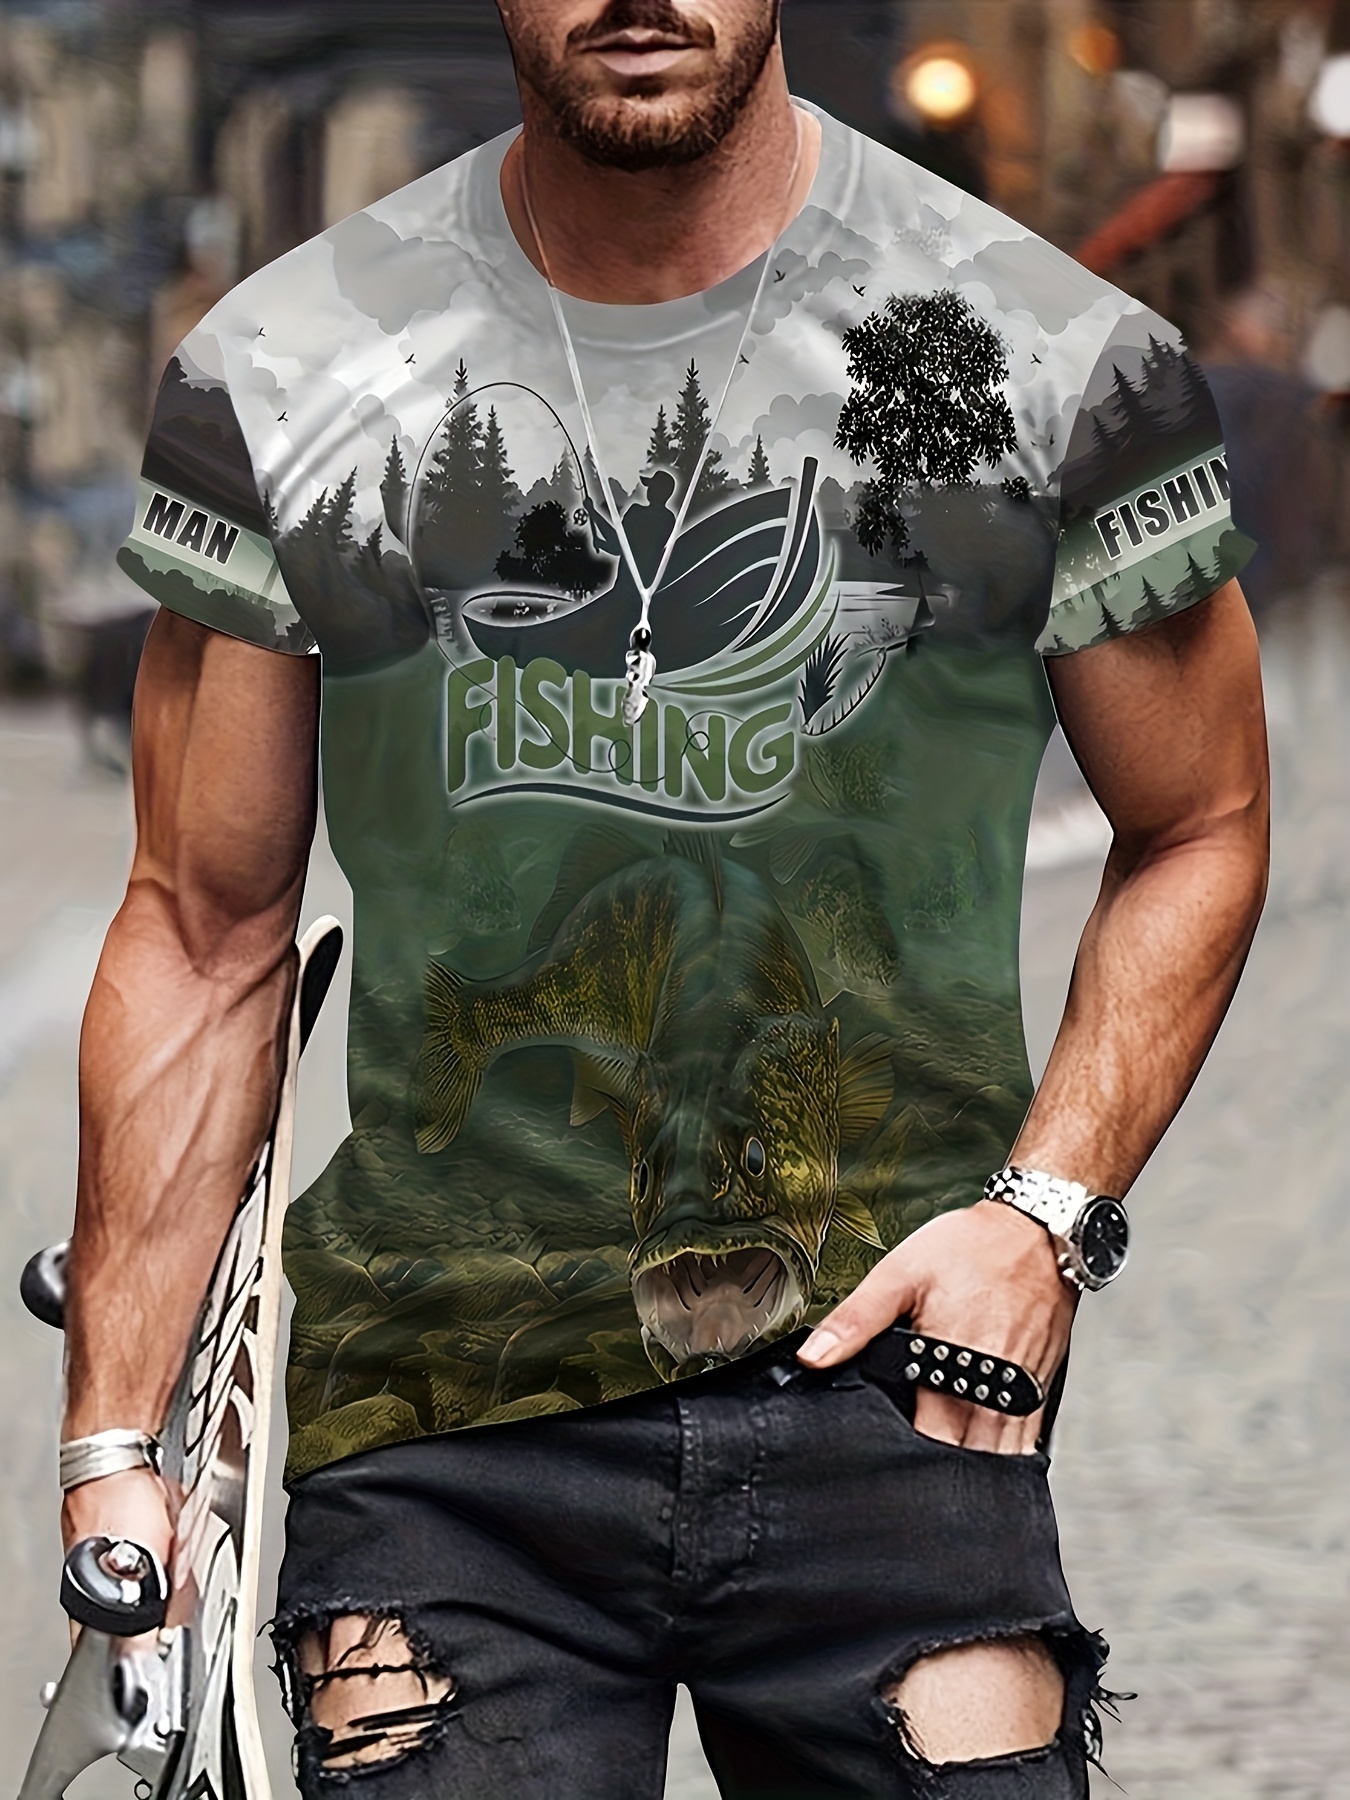 Fishing Theme Various 3D Digital Pattern Print Men's Graphic T-Shirt, Causal Comfy Tees, Short Sleeve Pullover Tops, Men's Summer Outdoor Clothing